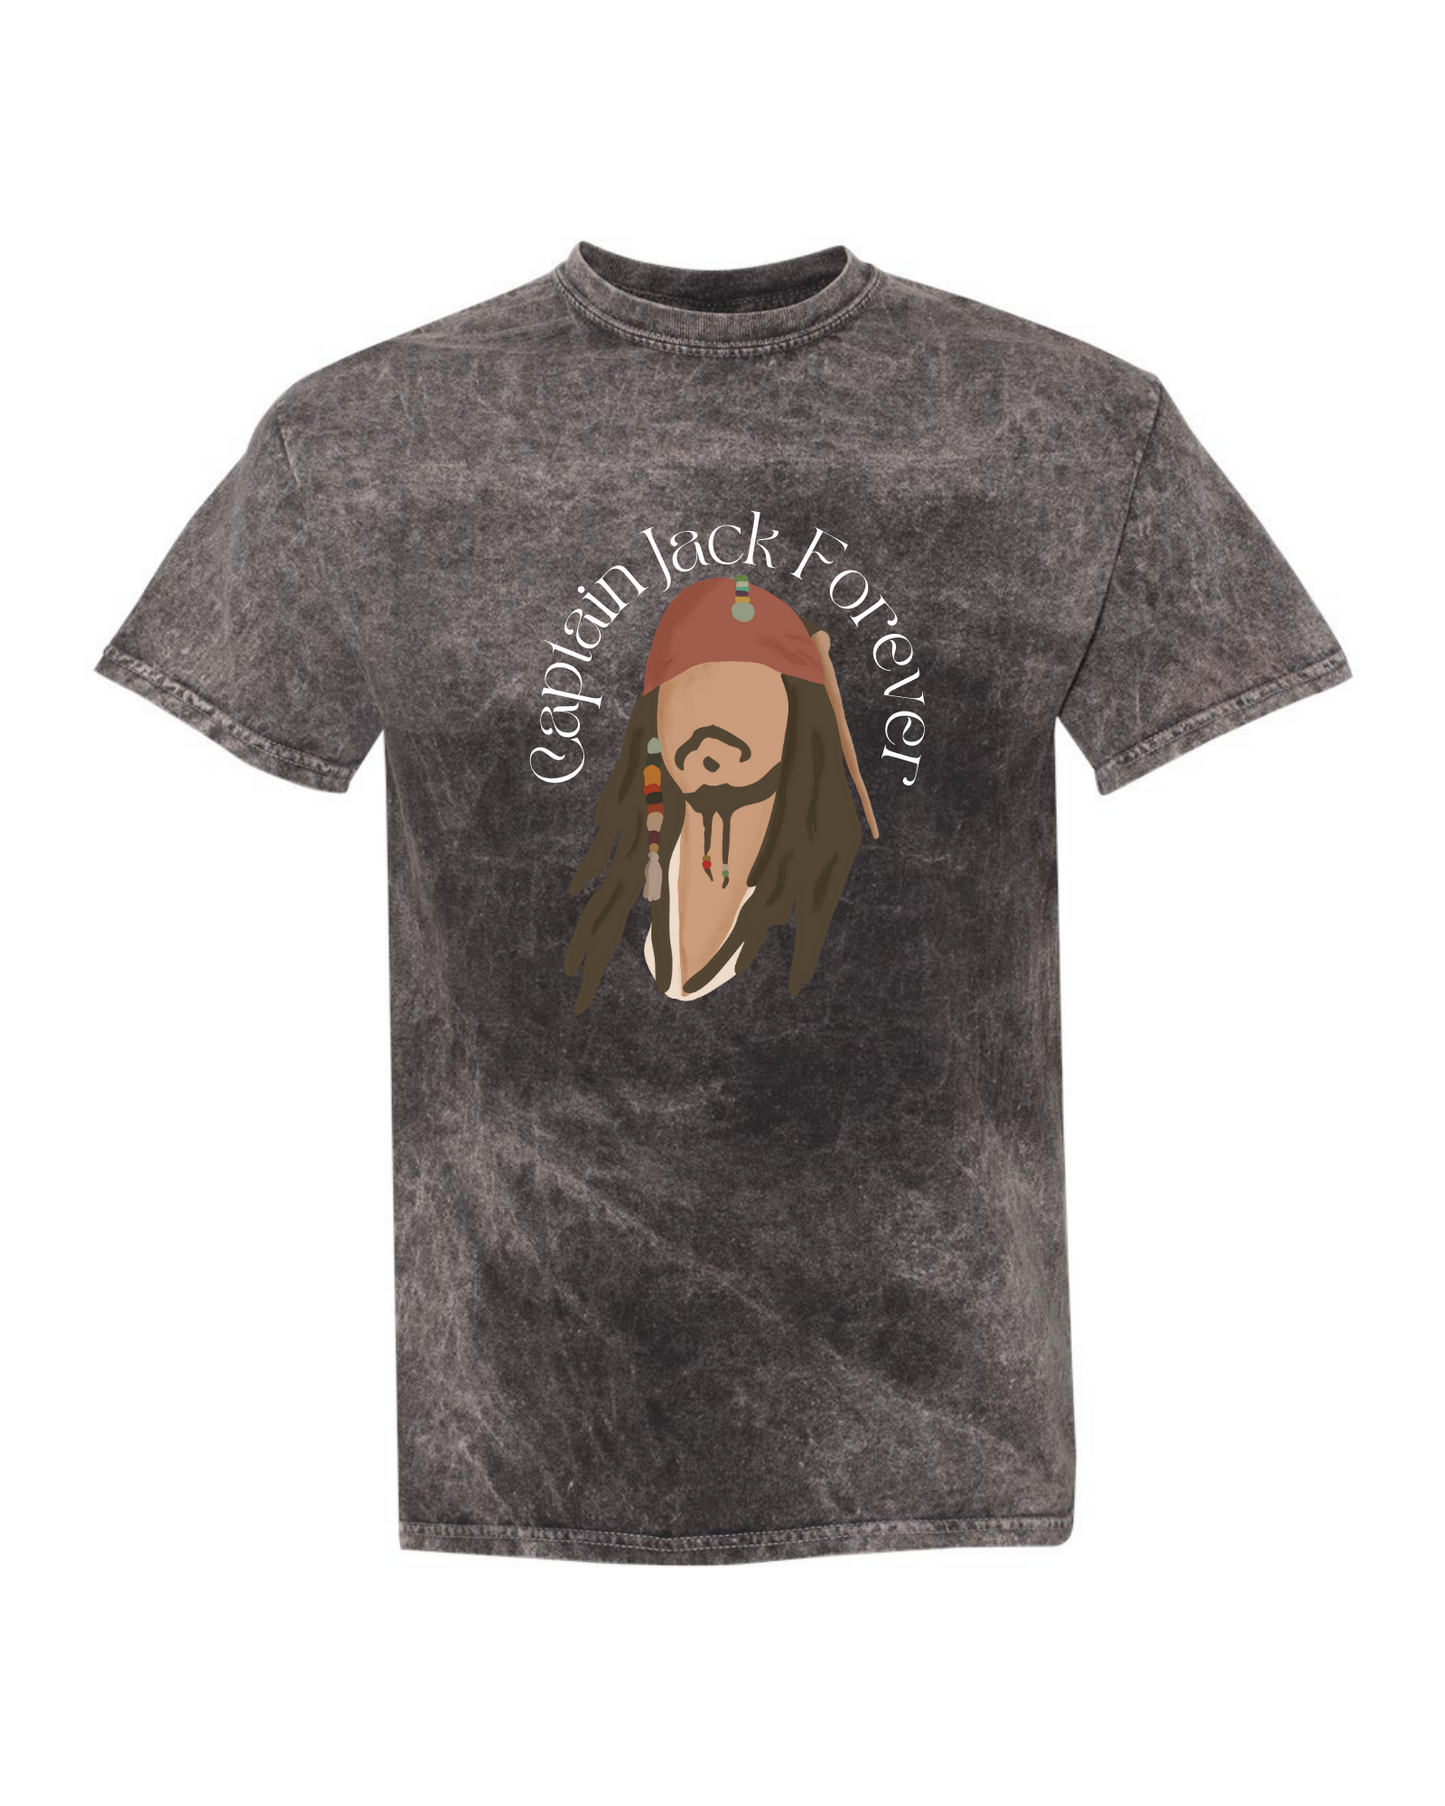 Captain Jack Forever | Adult Mineral Wash Tee-Adult Tee-Sister Shirts-Sister Shirts, Cute & Custom Tees for Mama & Littles in Trussville, Alabama.